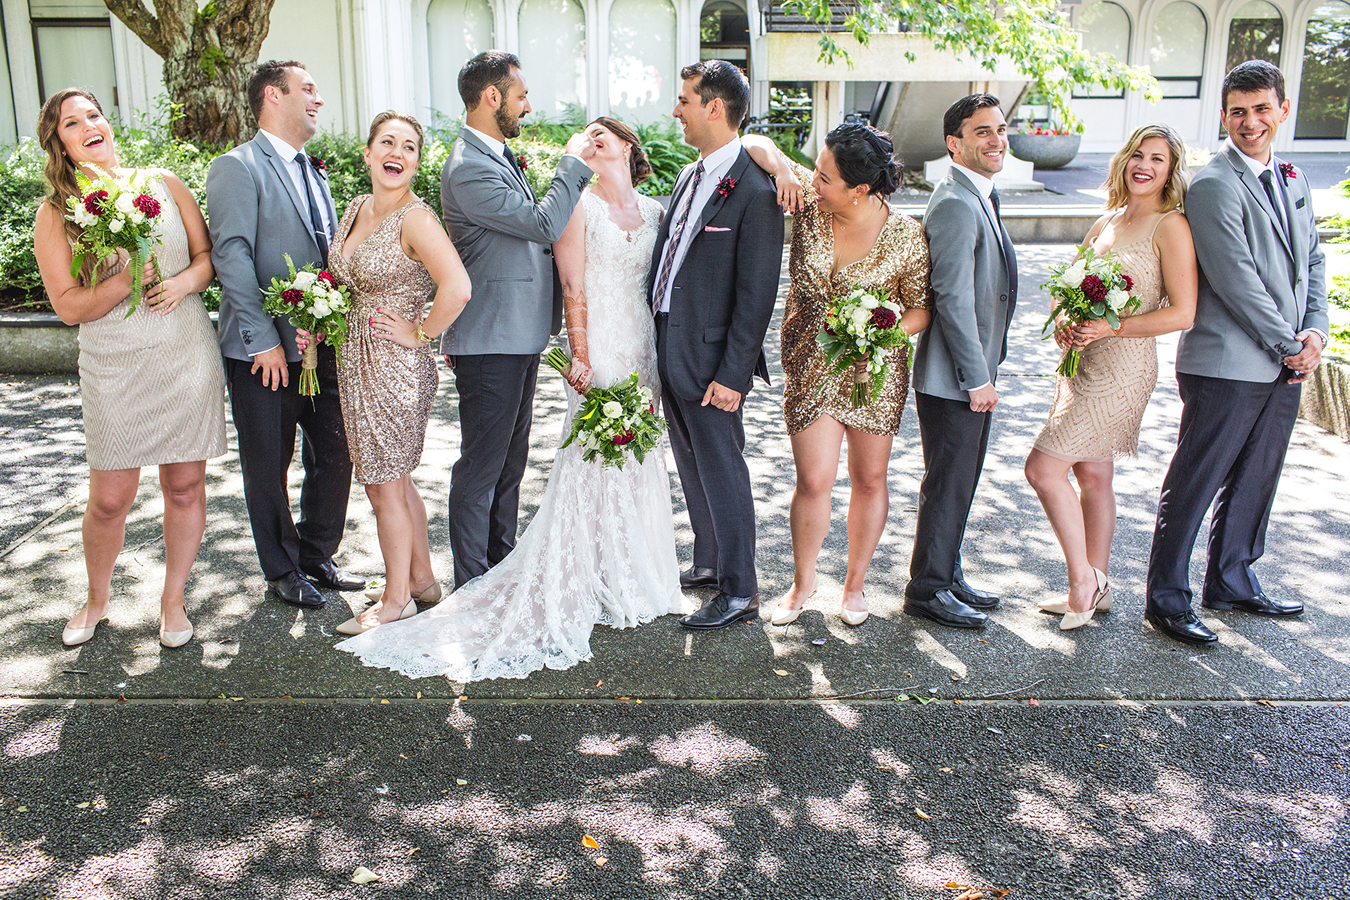 Bridal party laughing together at Vanier Park in Vancouver